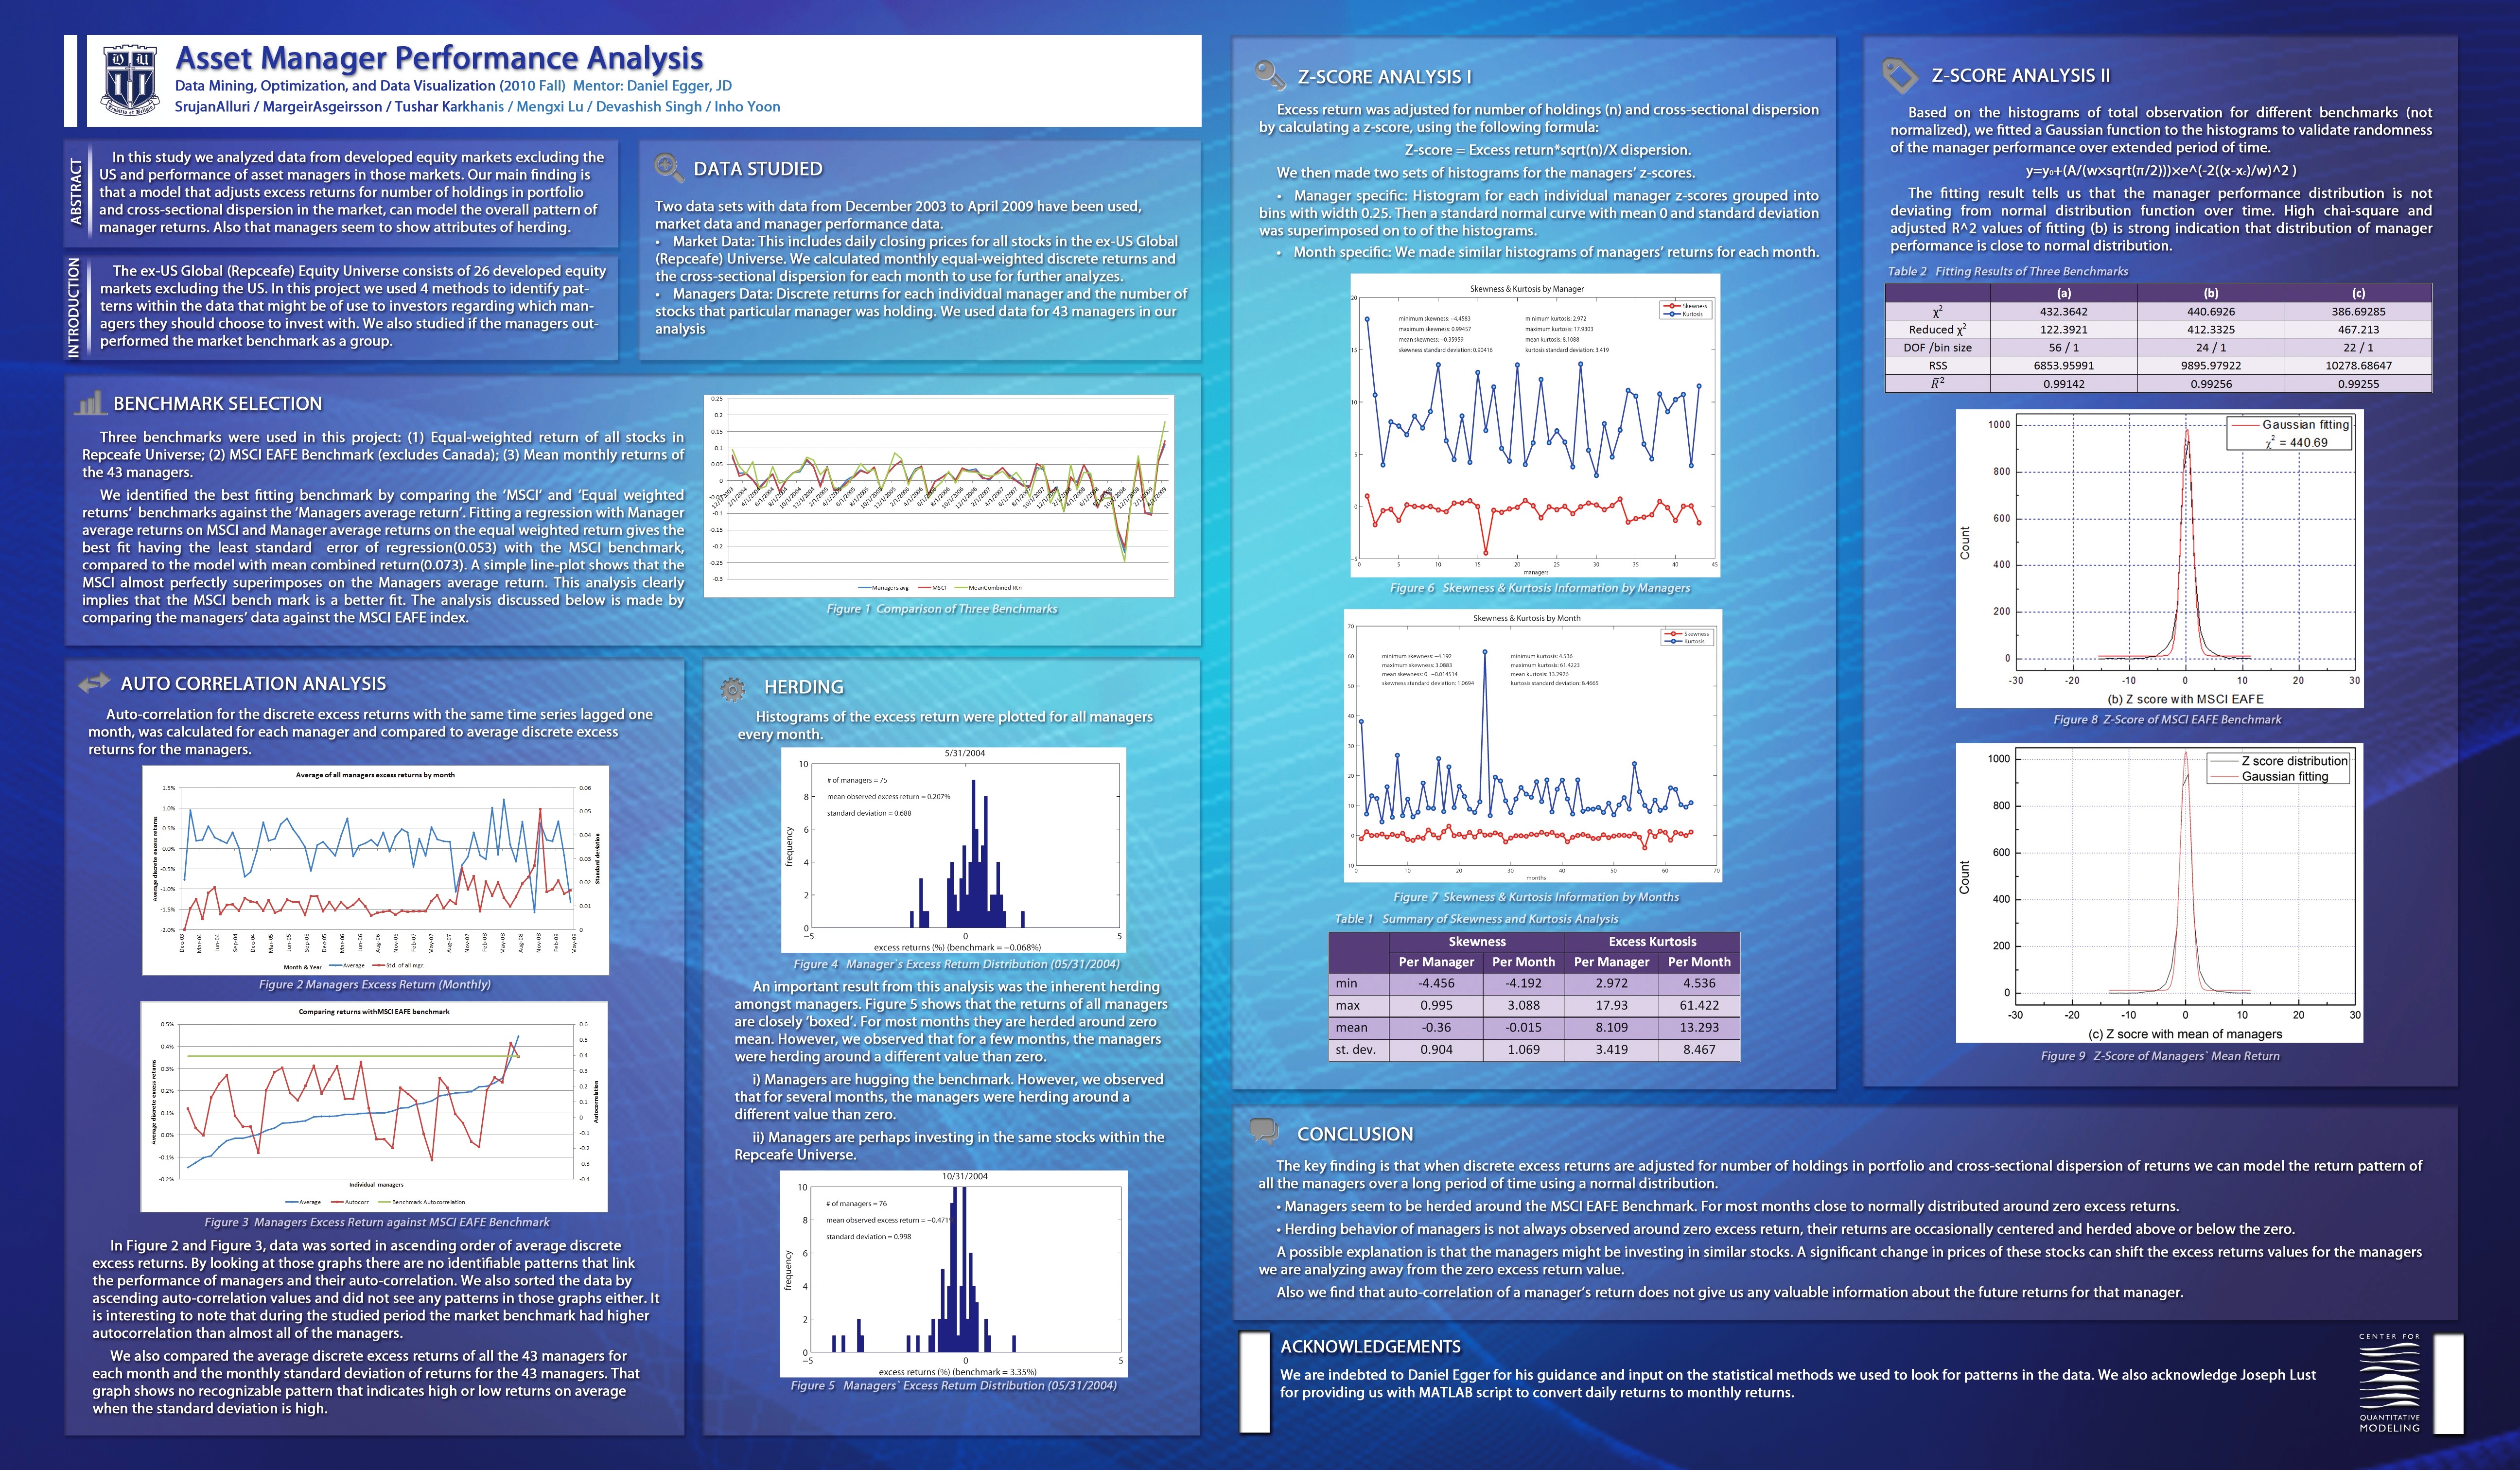 Student Project Posters | Center for Quantitative Modeling5184 x 3024